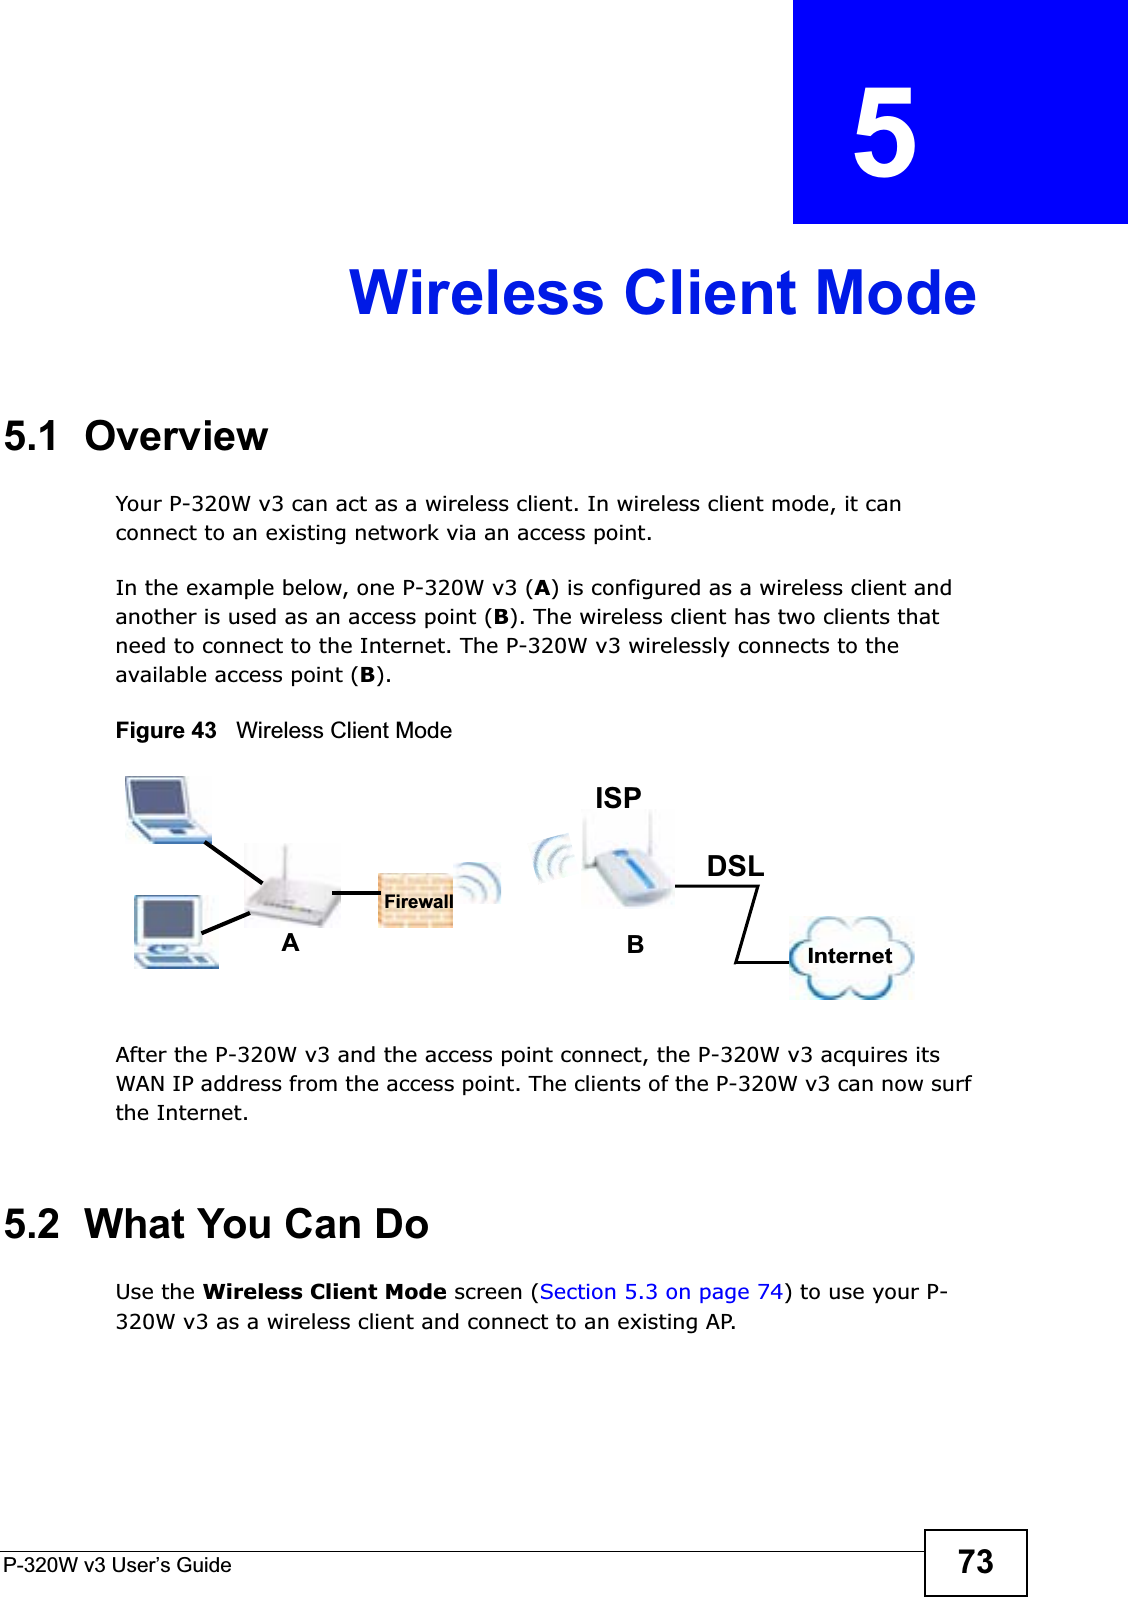 P-320W v3 User’s Guide 73CHAPTER  5 Wireless Client Mode5.1  OverviewYour P-320W v3 can act as a wireless client. In wireless client mode, it can connect to an existing network via an access point.In the example below, one P-320W v3 (A) is configured as a wireless client and another is used as an access point (B). The wireless client has two clients that need to connect to the Internet. The P-320W v3 wirelessly connects to the available access point (B). Figure 43   Wireless Client ModeAfter the P-320W v3 and the access point connect, the P-320W v3 acquires its WAN IP address from the access point. The clients of the P-320W v3 can now surf the Internet. 5.2  What You Can DoUse the Wireless Client Mode screen (Section 5.3 on page 74) to use your P-320W v3 as a wireless client and connect to an existing AP.ABInternetDSLFirewallISP